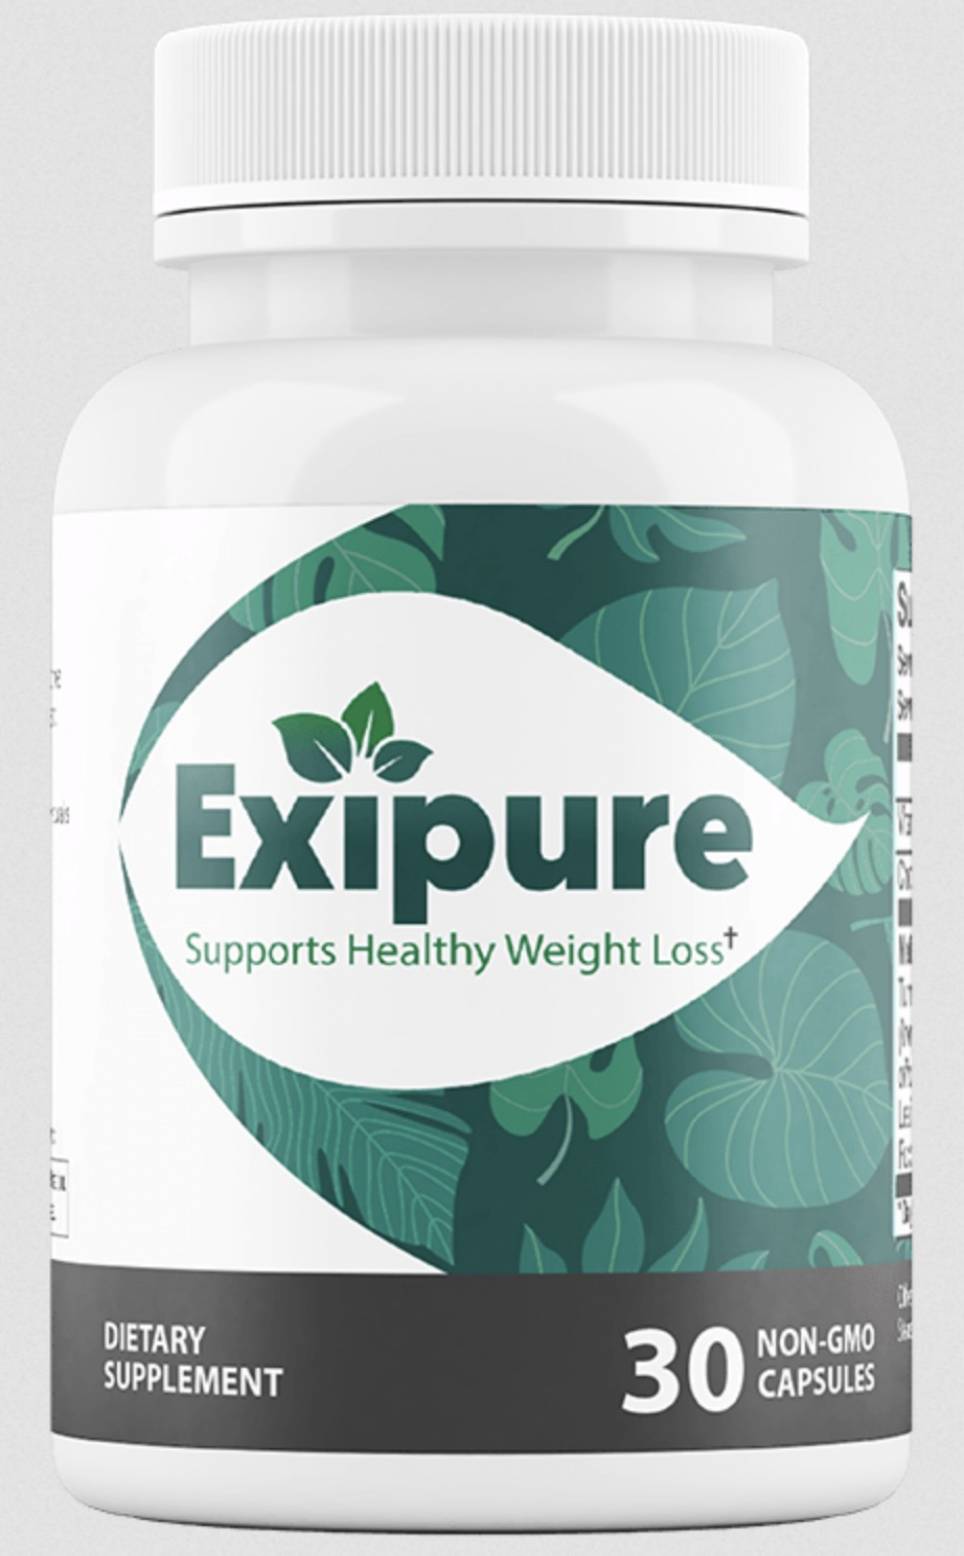 Can Exipure Cause Weight Gain